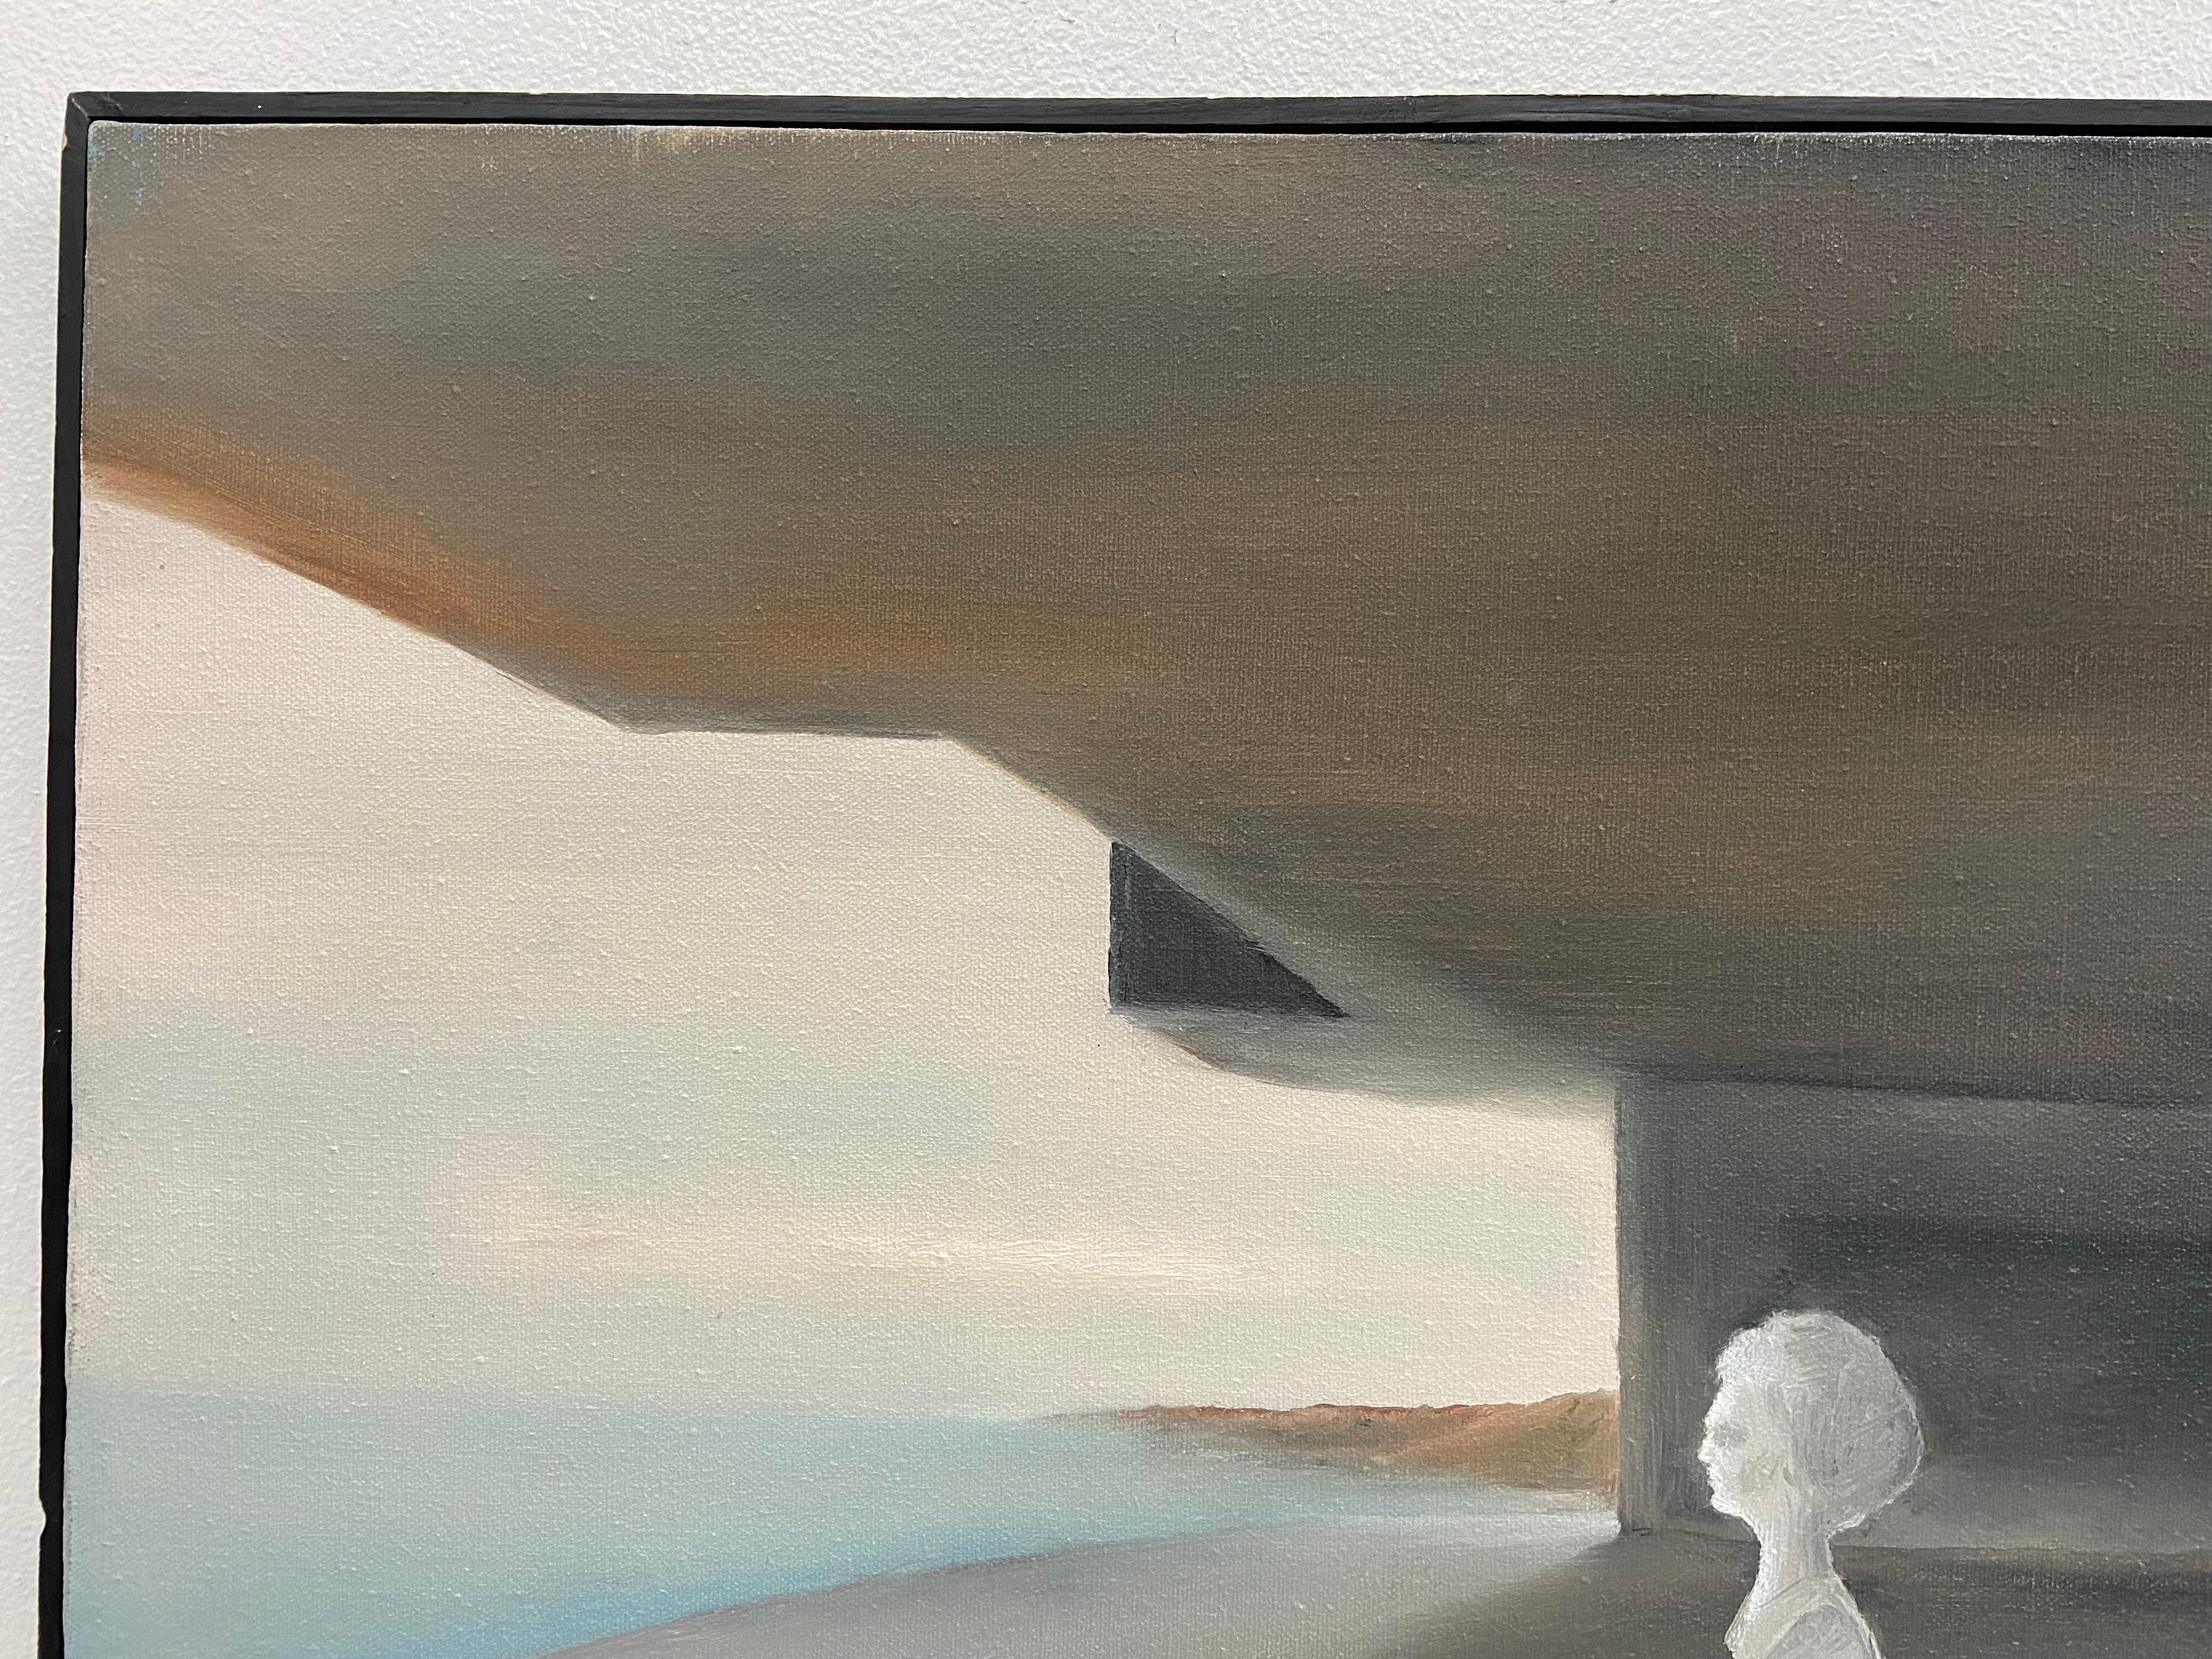 A vintage, circa 1978, Surrealist style landscape painting featuring a strong, Modernist architectural element mixed with a classically inspired bust as well as a box, possibly constructed of plywood or cardboard. The painting has an overall ombre